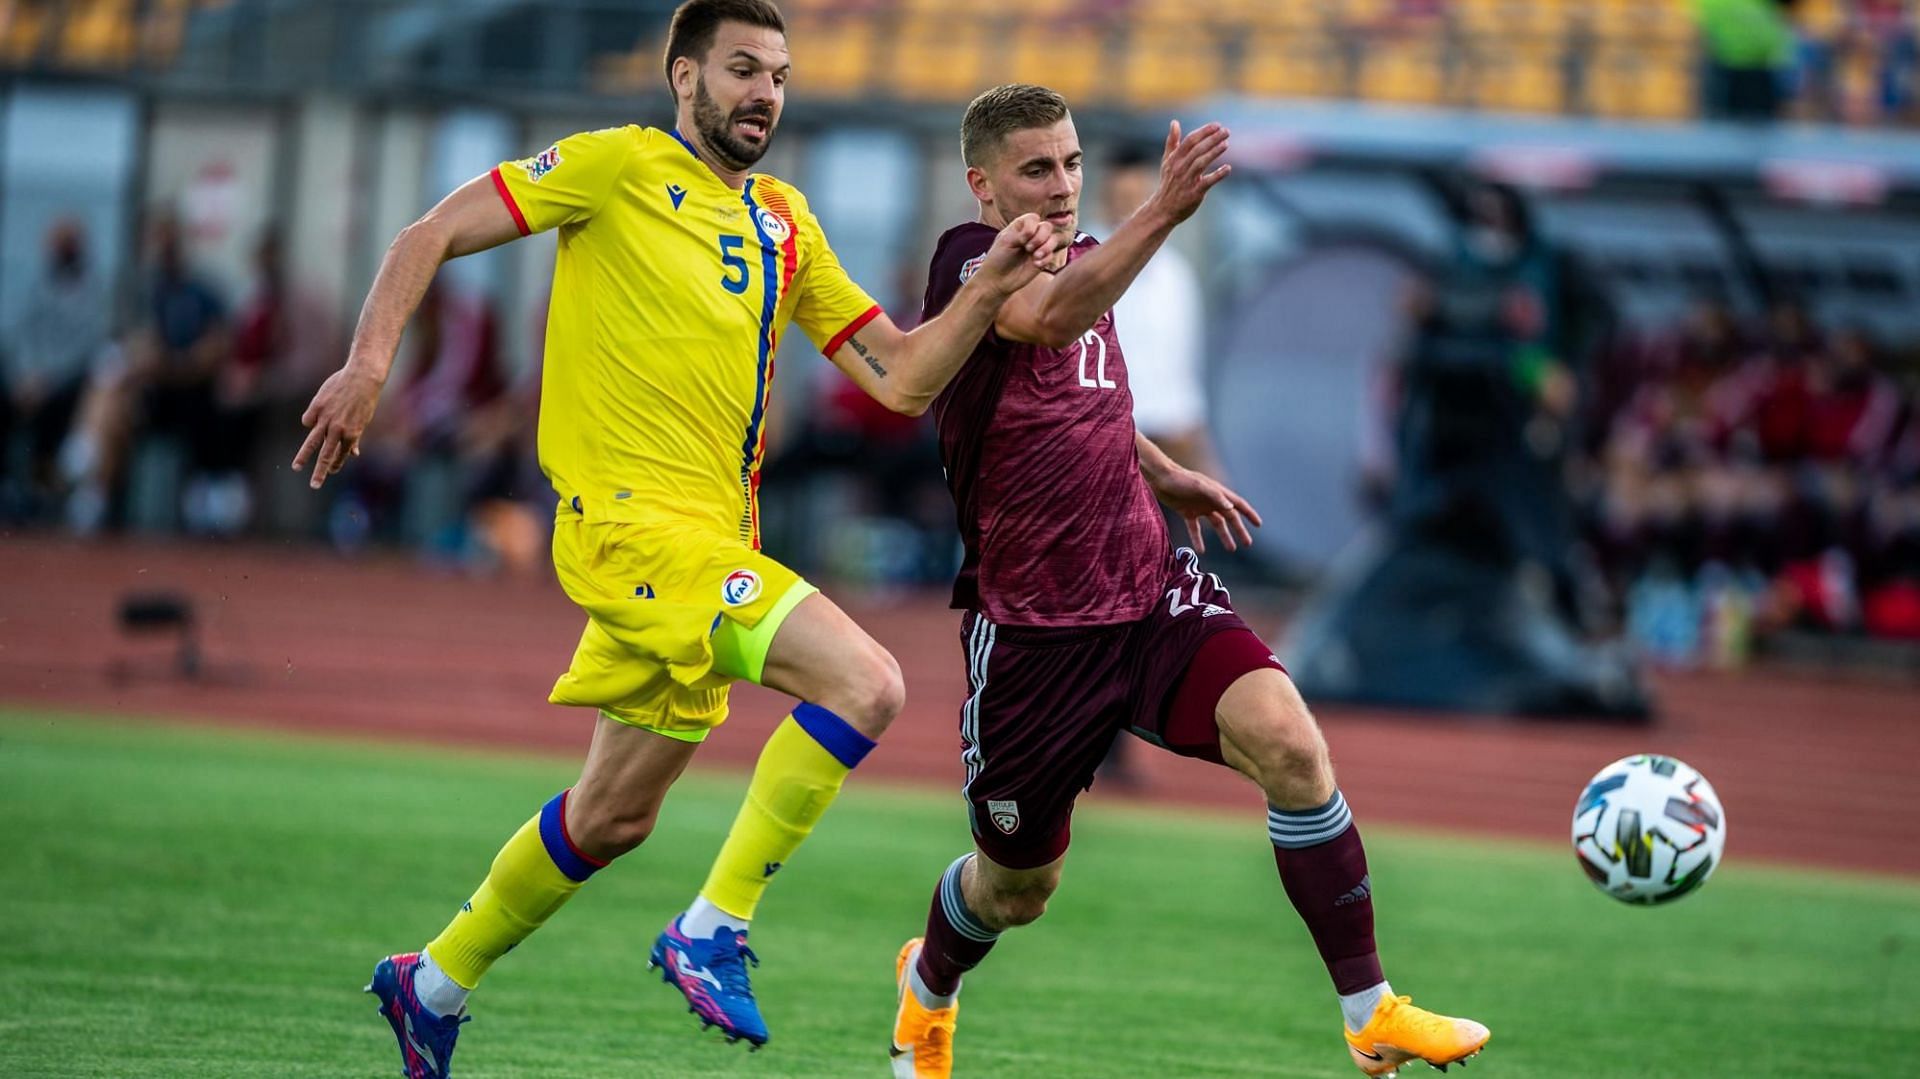 Moldova face Andorra in their final Nations League fixture of the month on Tuesday